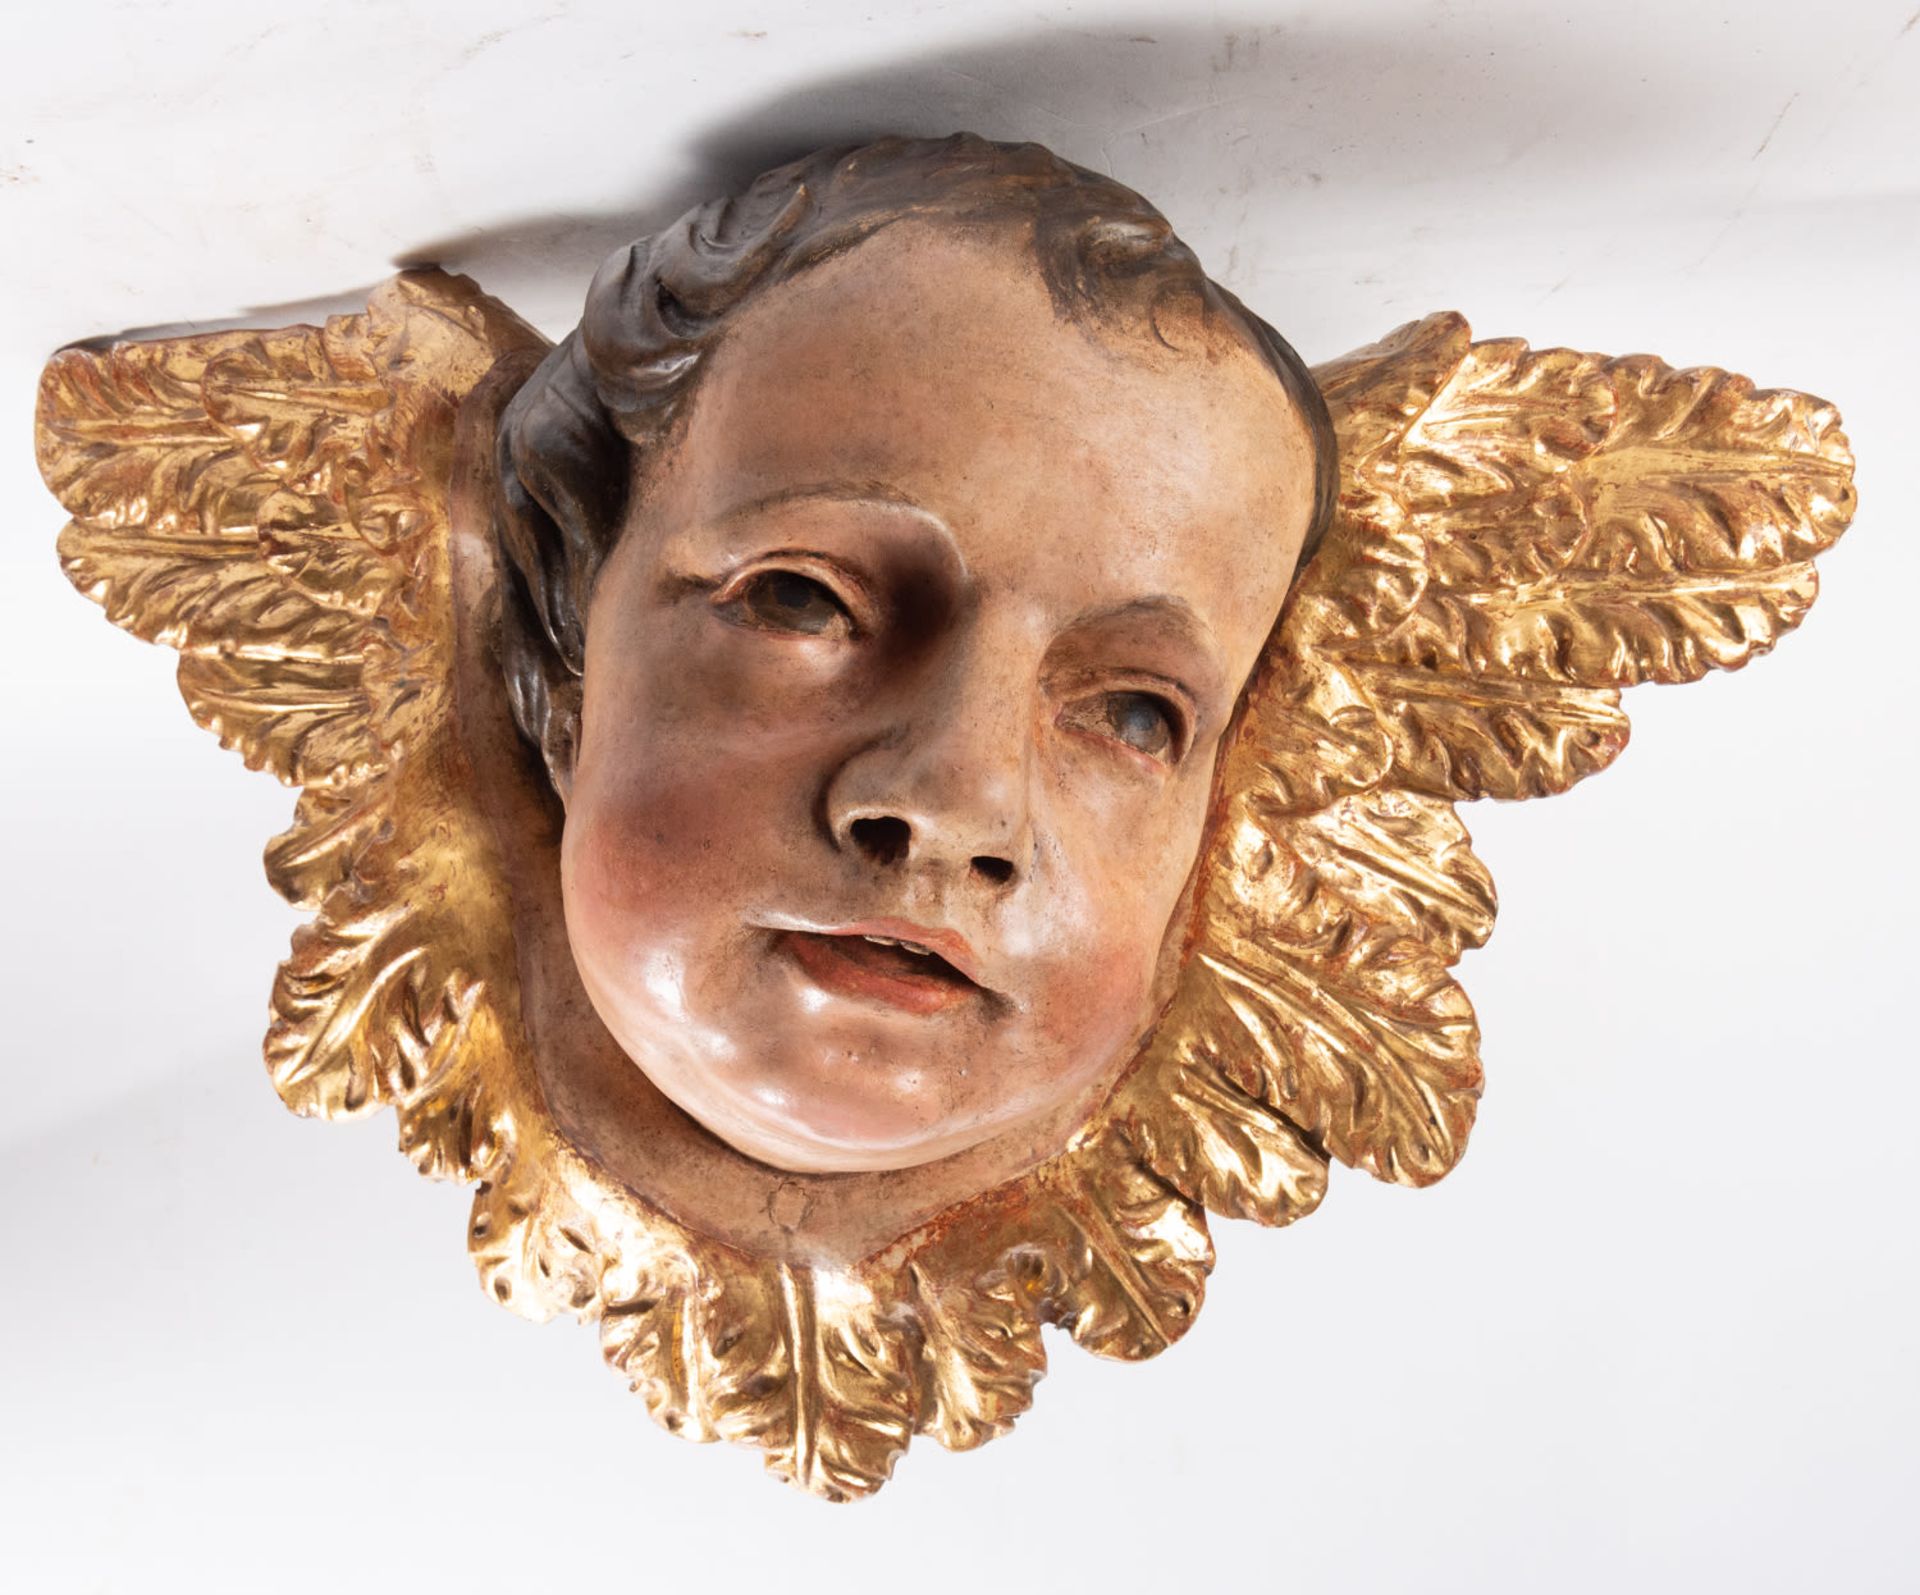 Exceptional Pair of Wall Cherubs Heads, Granada school from the 17th century - Image 2 of 6